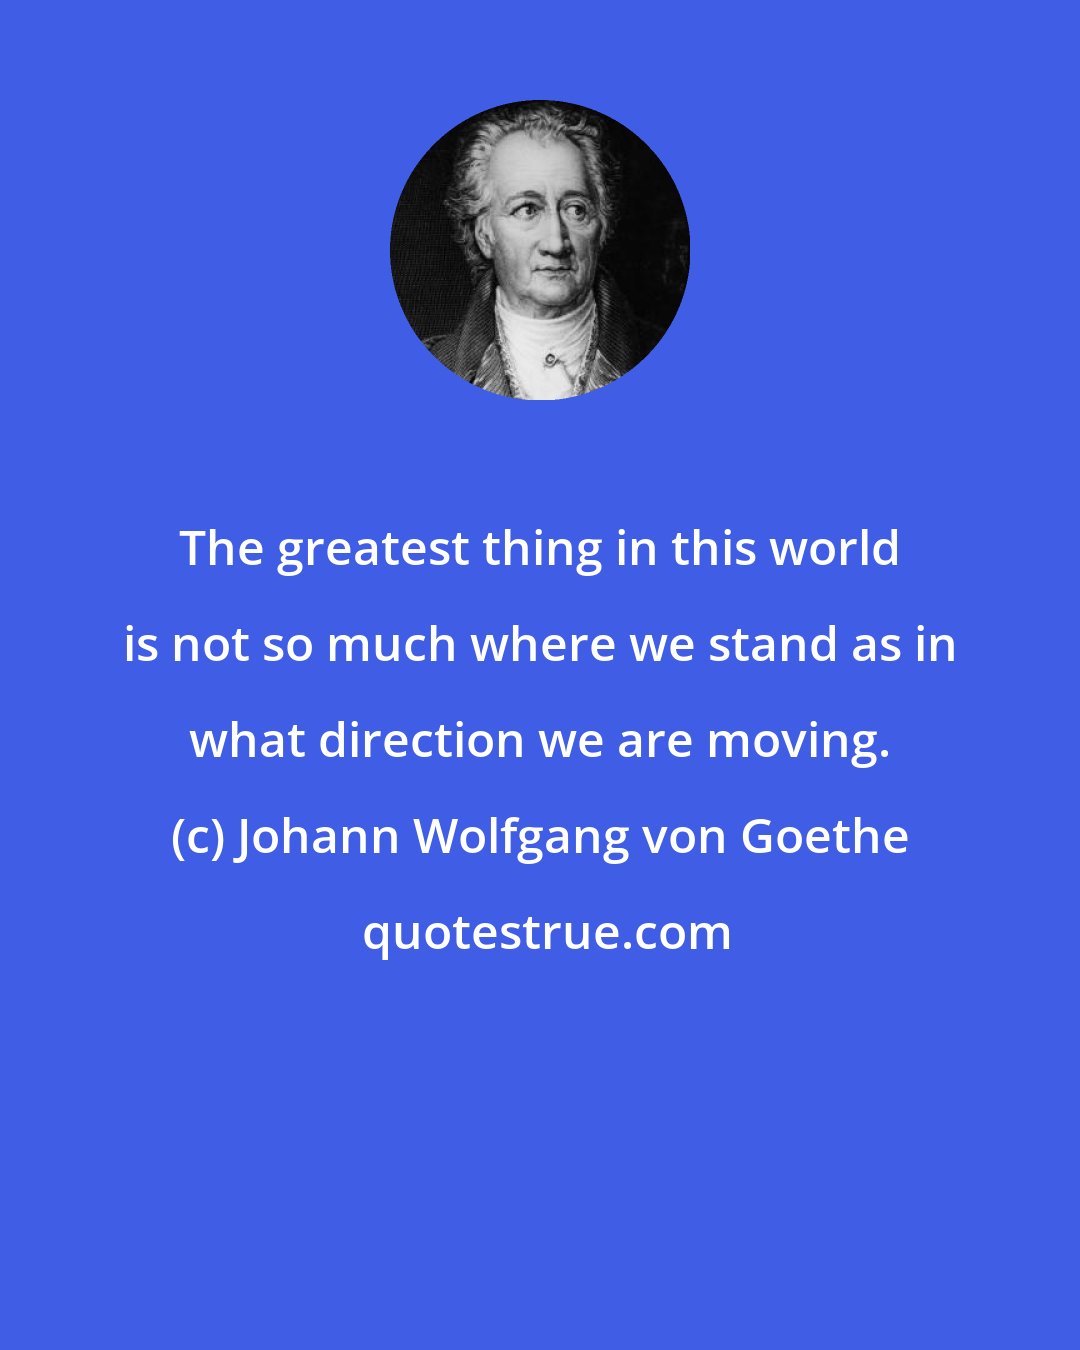 Johann Wolfgang von Goethe: The greatest thing in this world is not so much where we stand as in what direction we are moving.